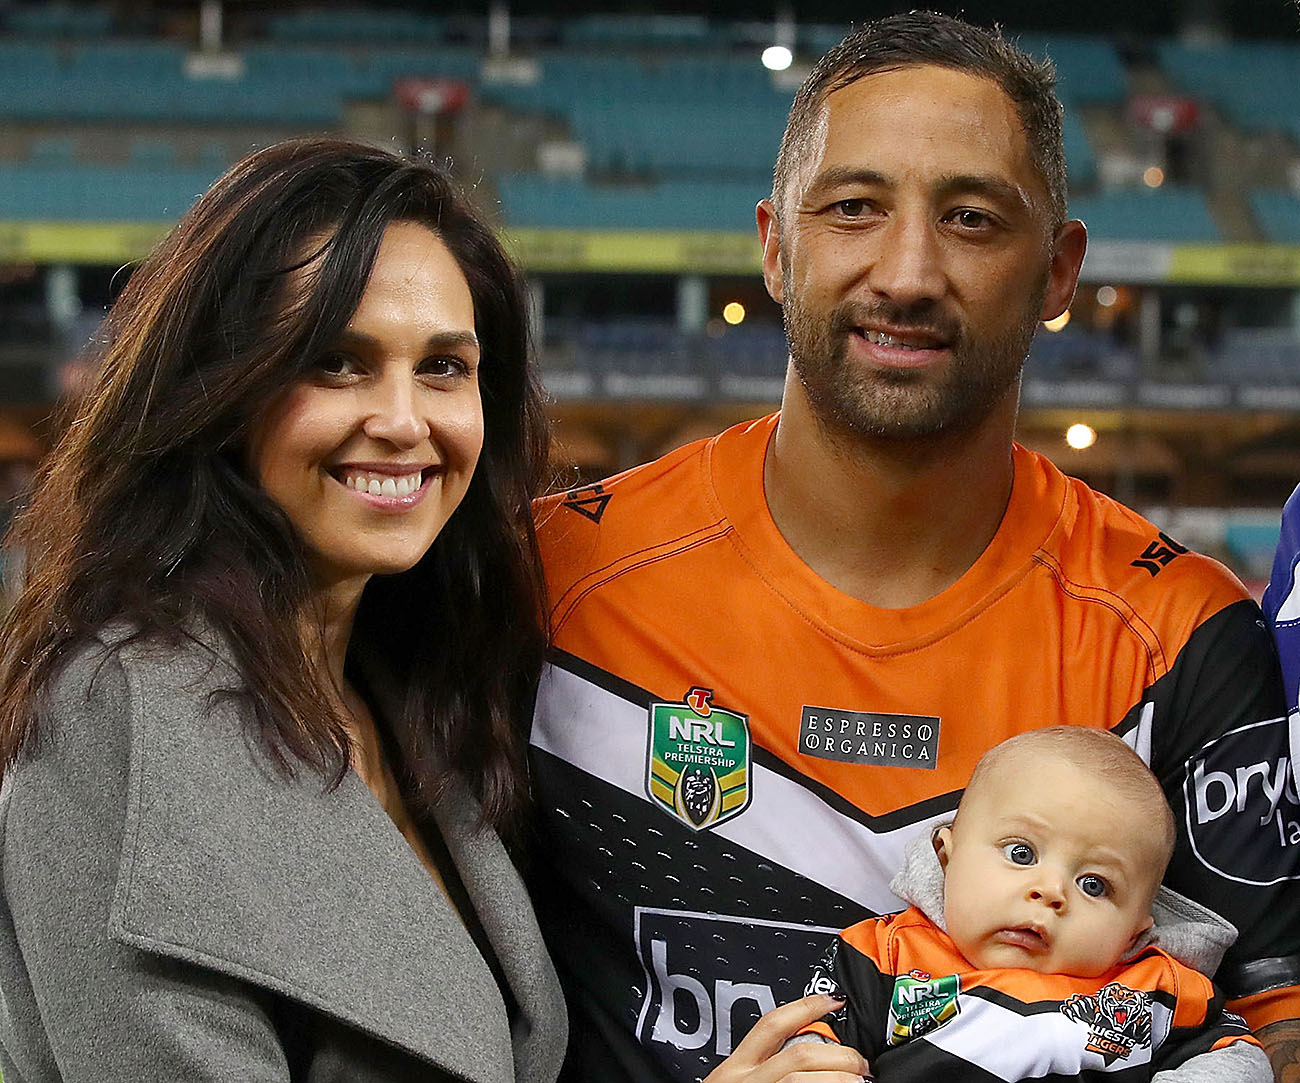 Zoe Marshall opens up about her ‘brutal’ first few months of motherhood